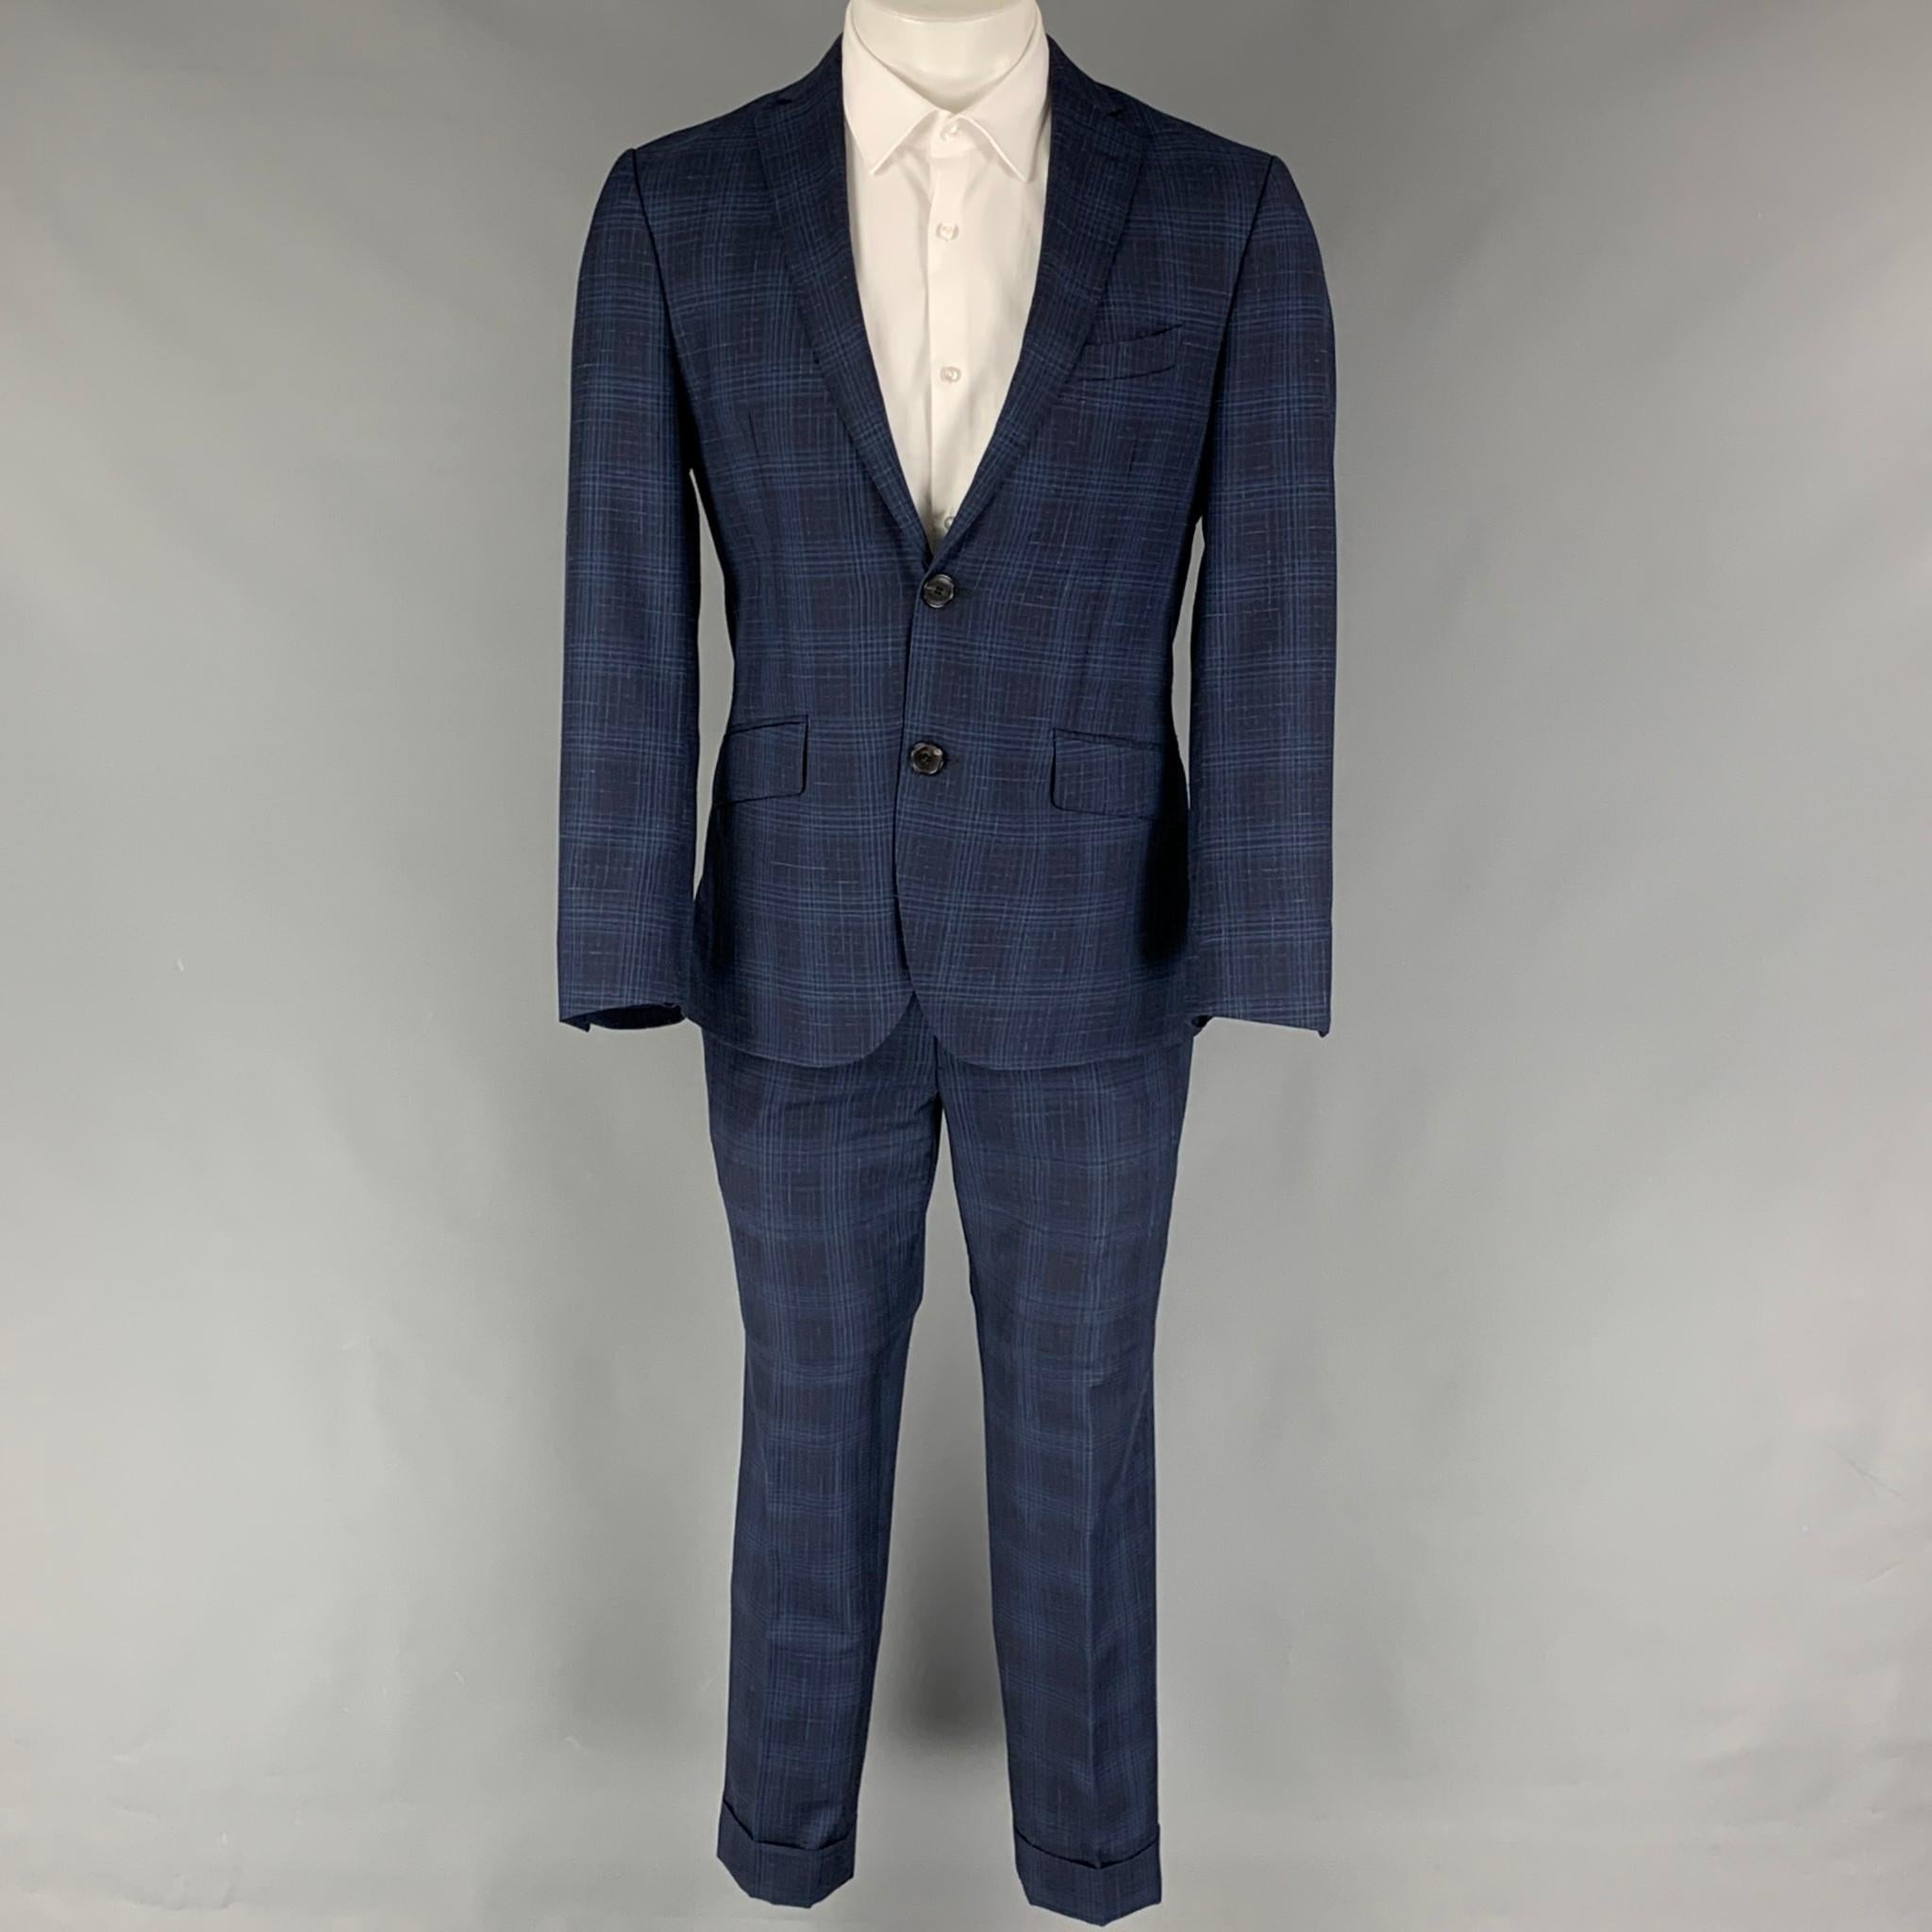 ETRO suit comes in a navy & blue plaid wool blend with a full liner and includes a single breasted, double button sport coat with a notch lapel and matching flat front trousers. Made in Italy.

Excellent Pre-Owned Condition.
Marked: